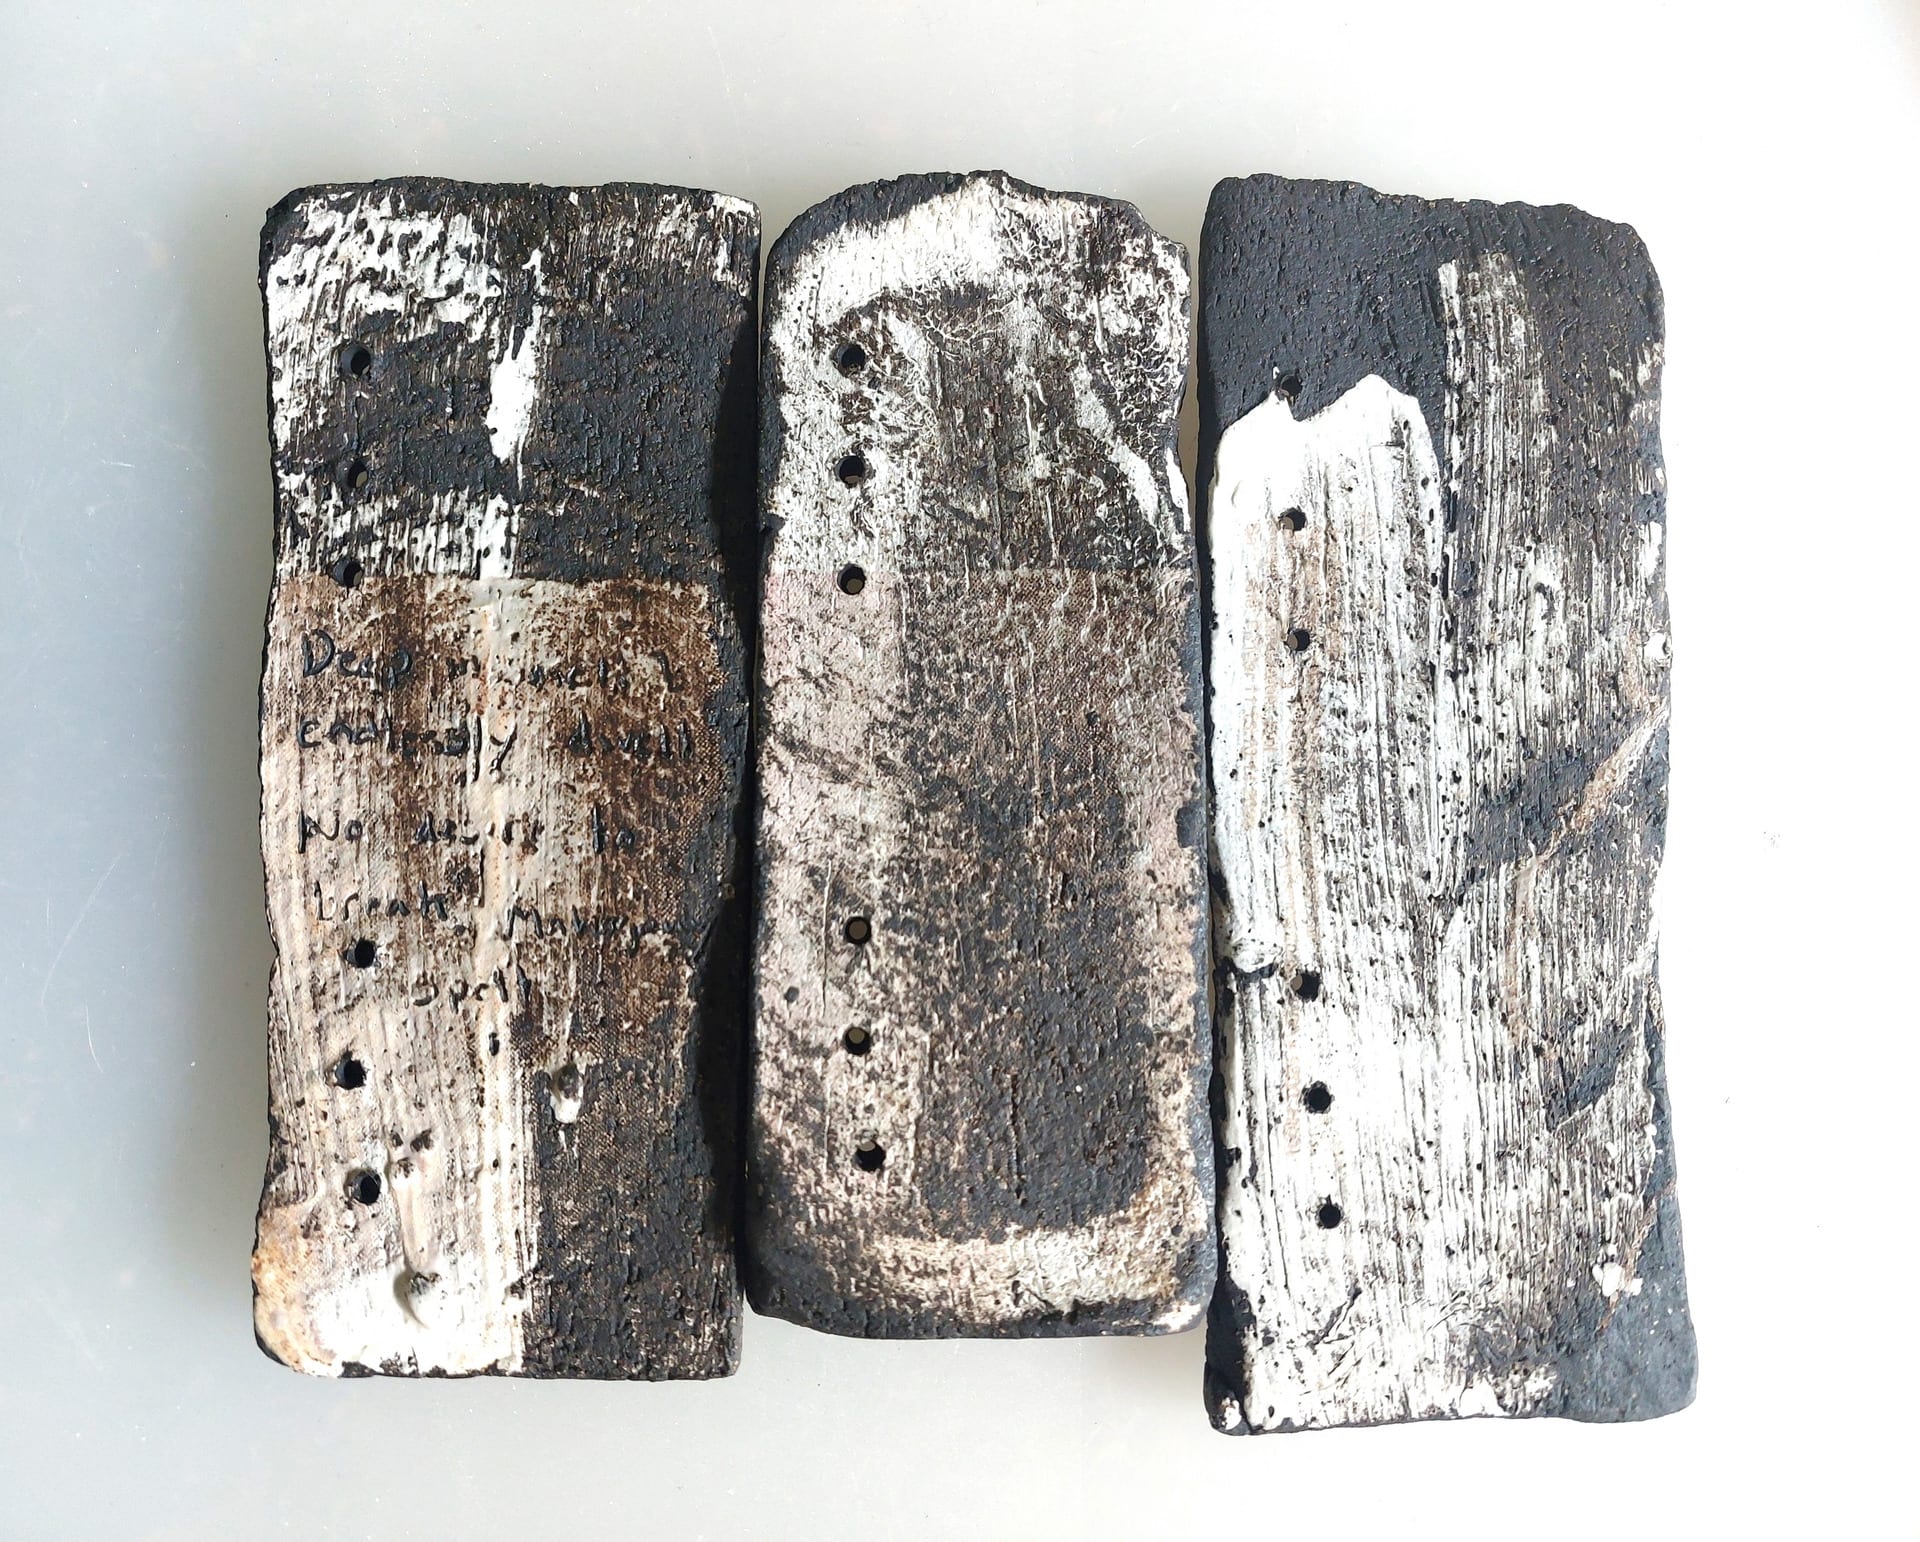 PAGES, CERAMIC / BLACK CLAY